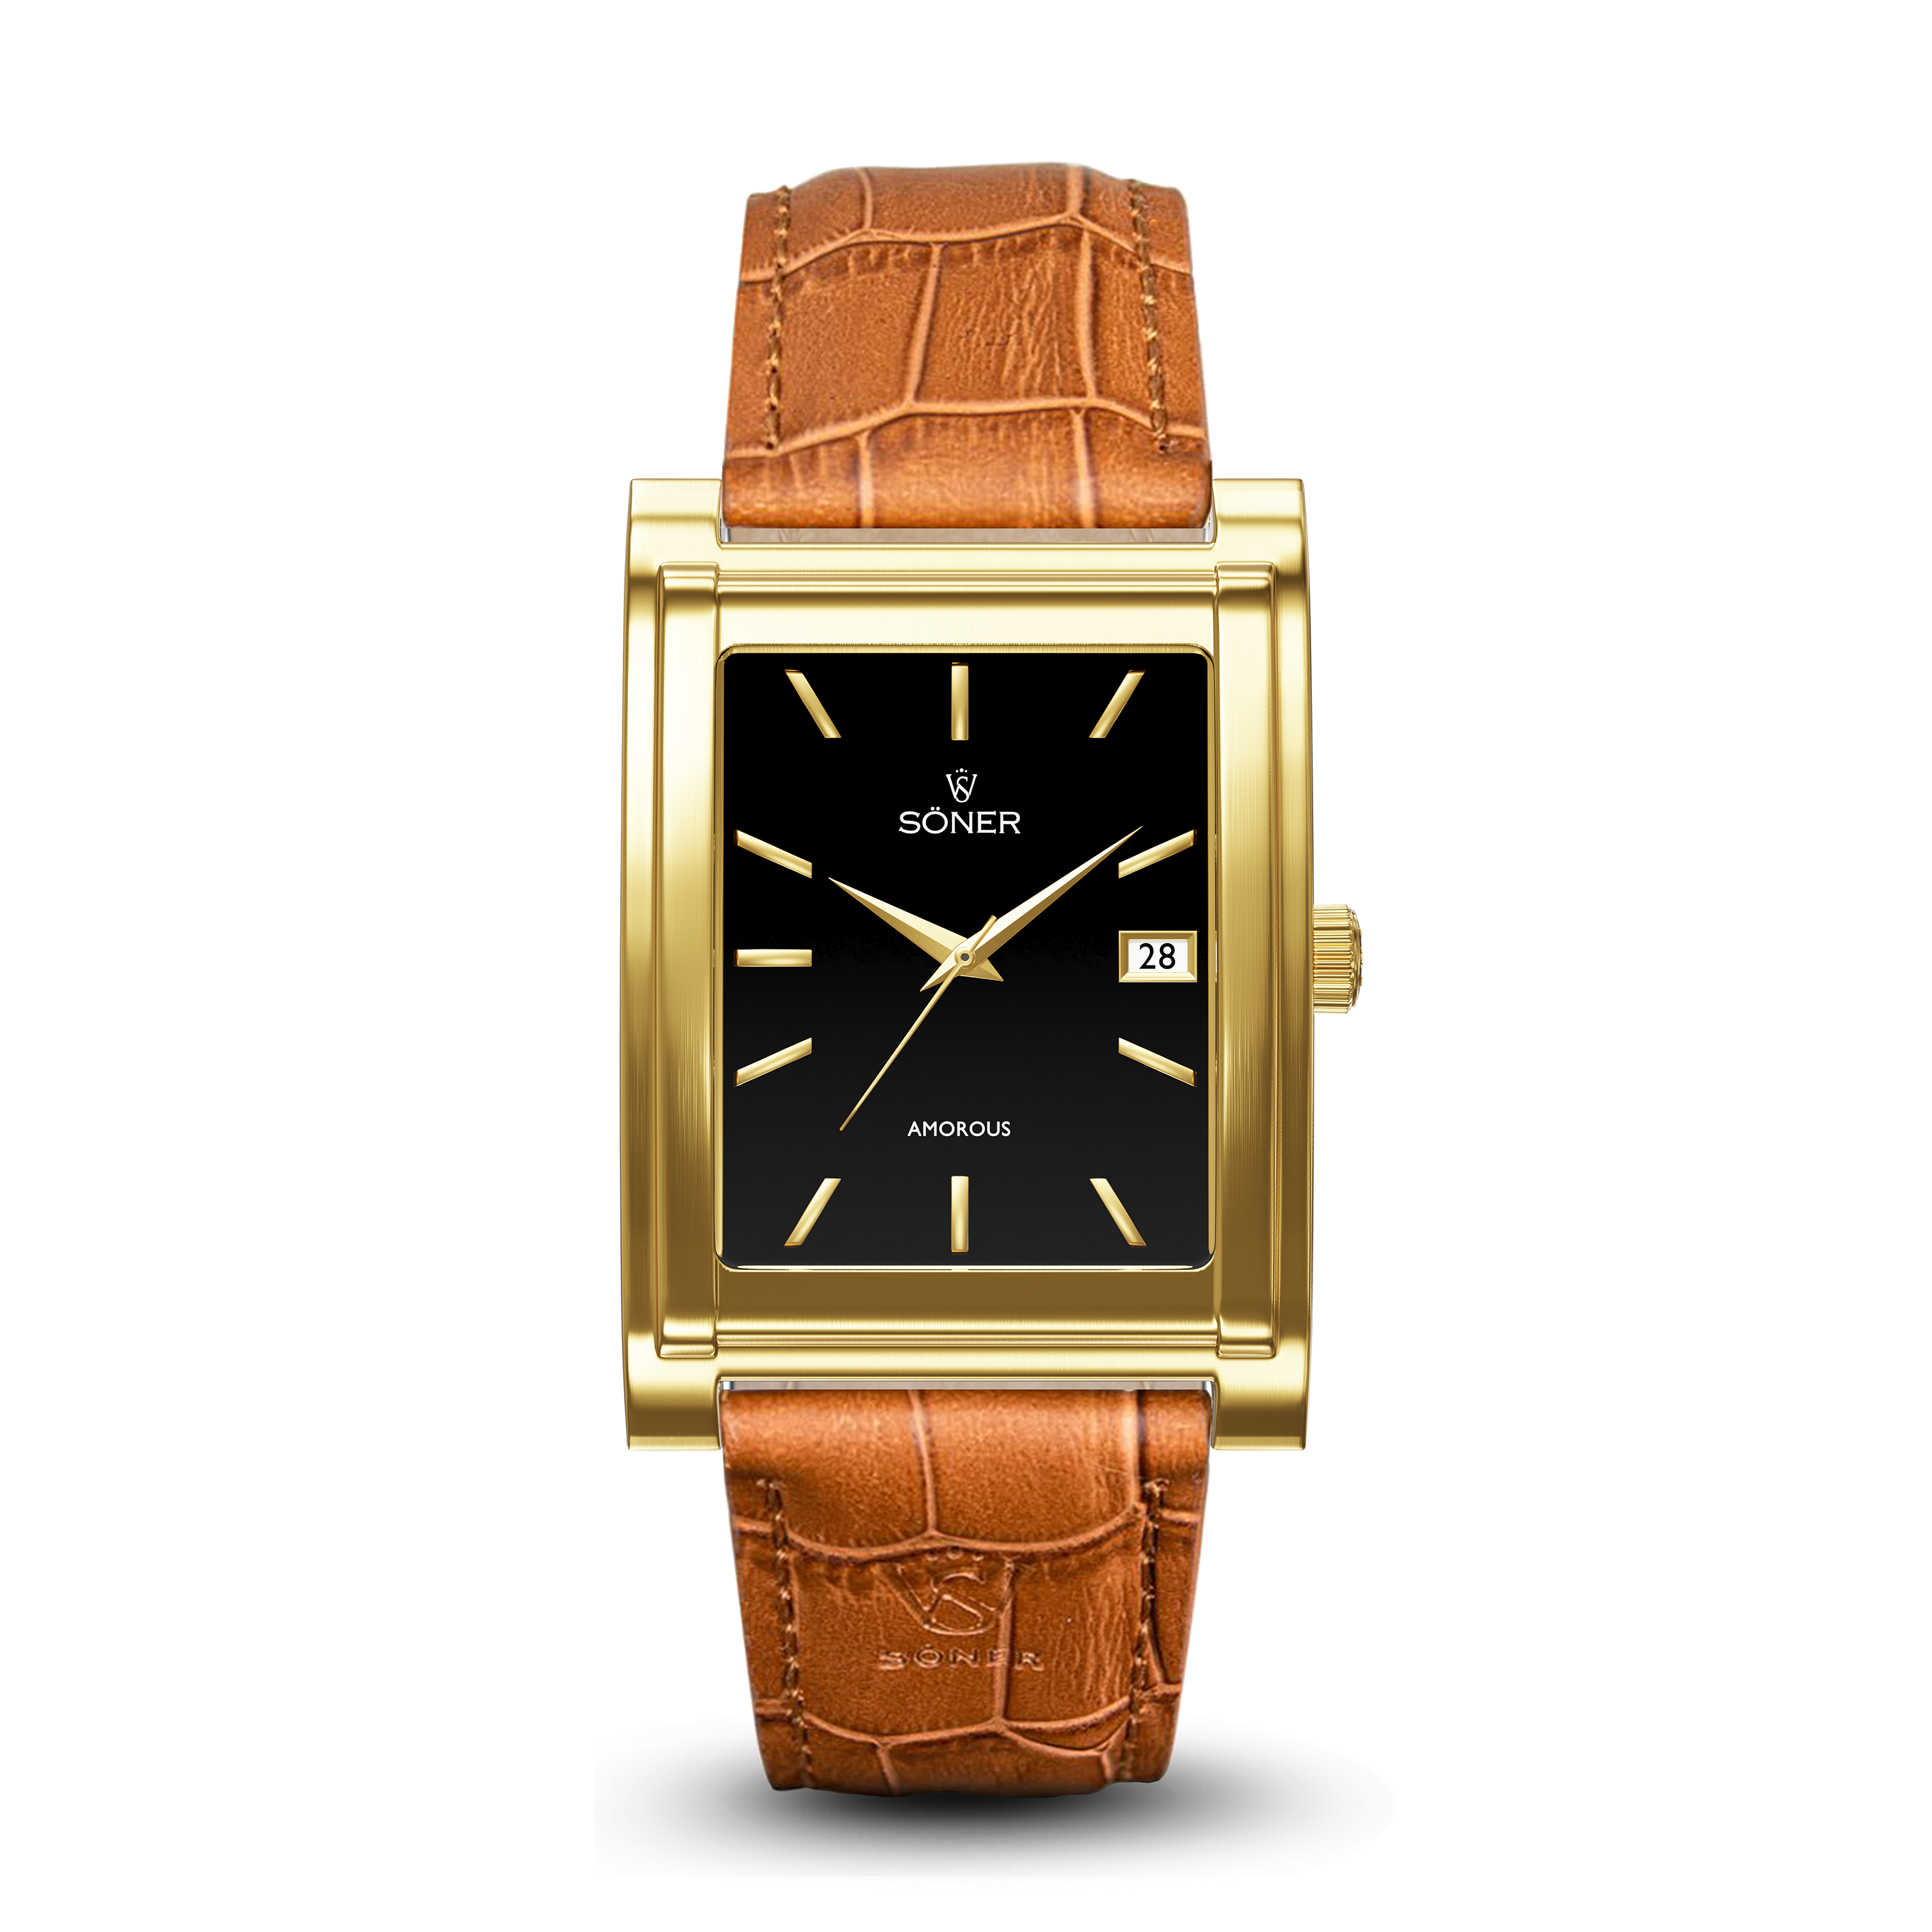 Square automatic watch, Amorous Milano with black dial - light brown alligator pattern leather strap front view